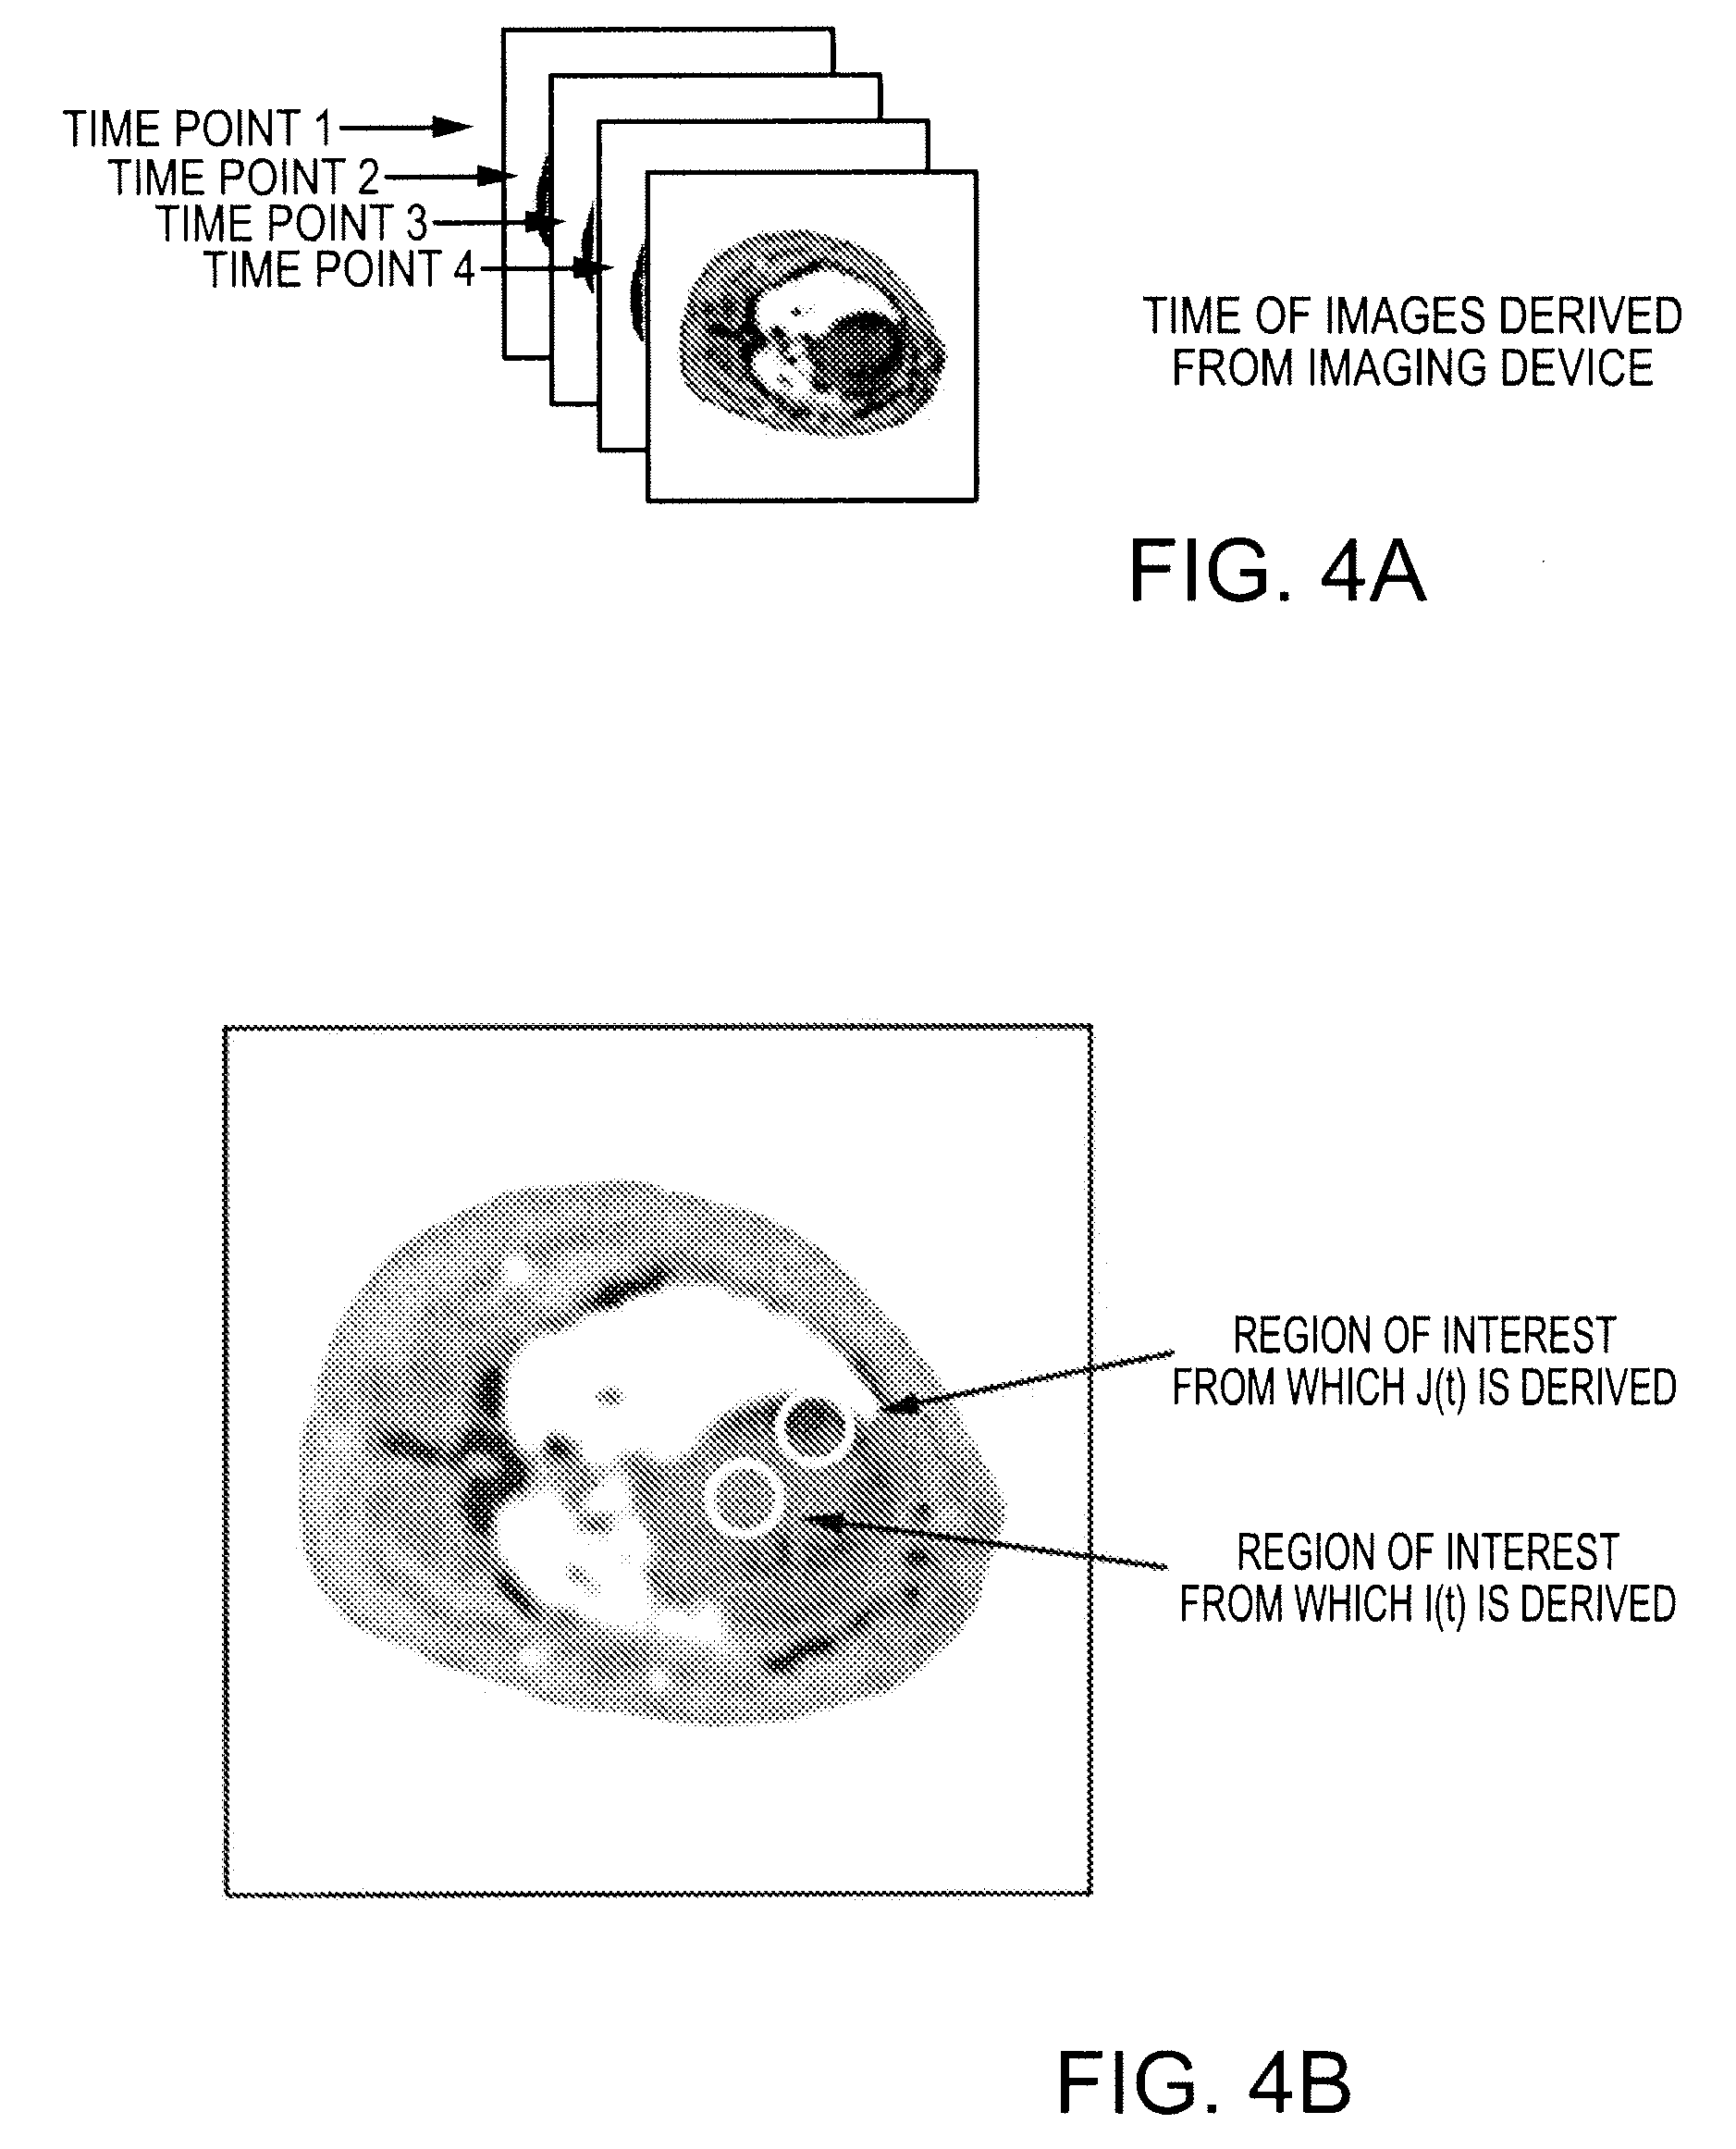 Method and apparatus for quantifying the behavior of an administered contrast agent